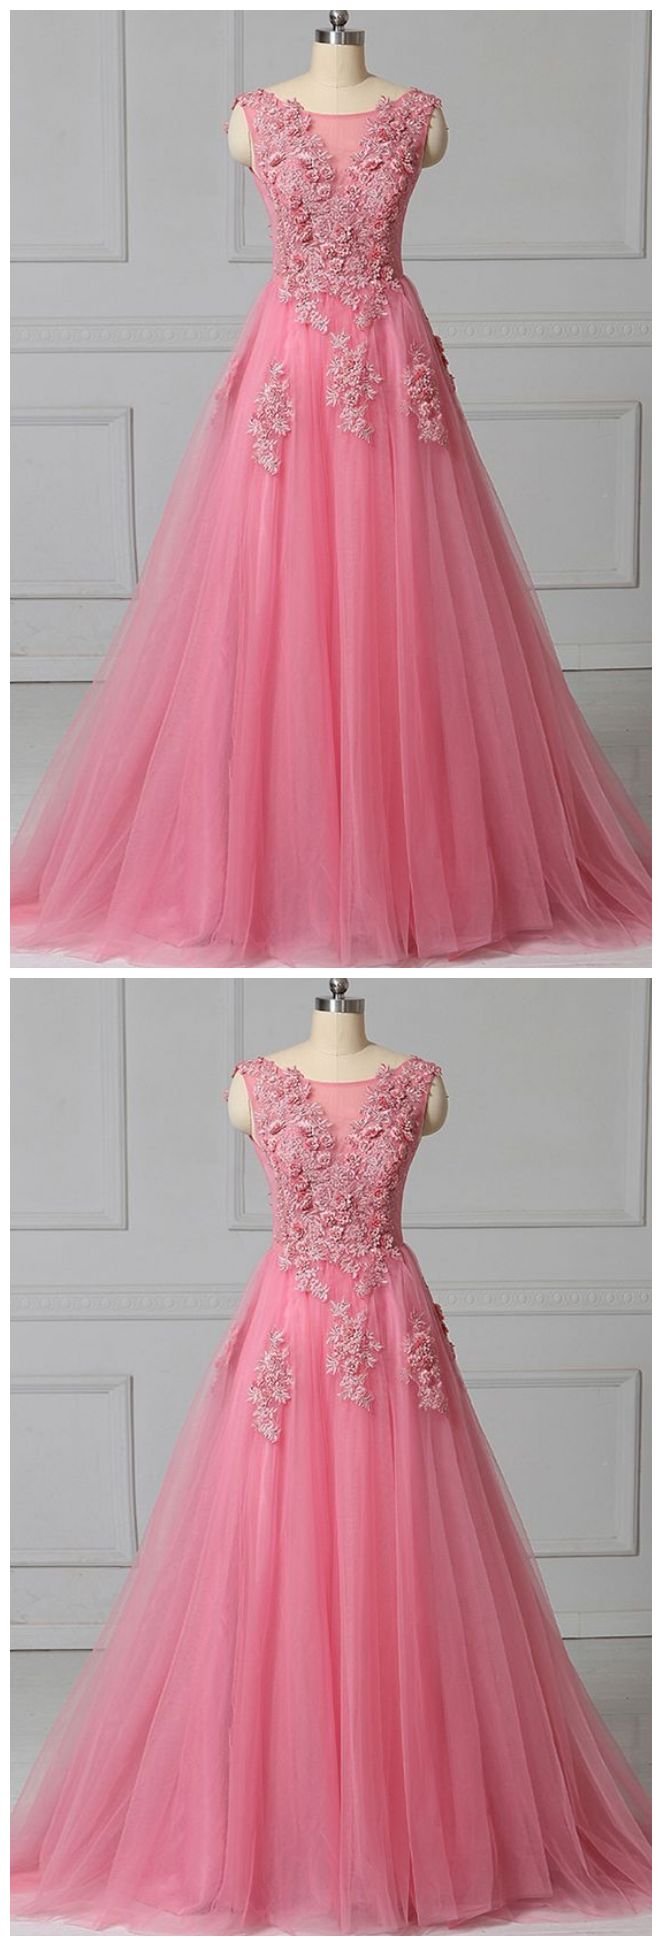 Tulle Scoop Neck 3d Lace Applique Evening Dress, Prom Dress For Teens